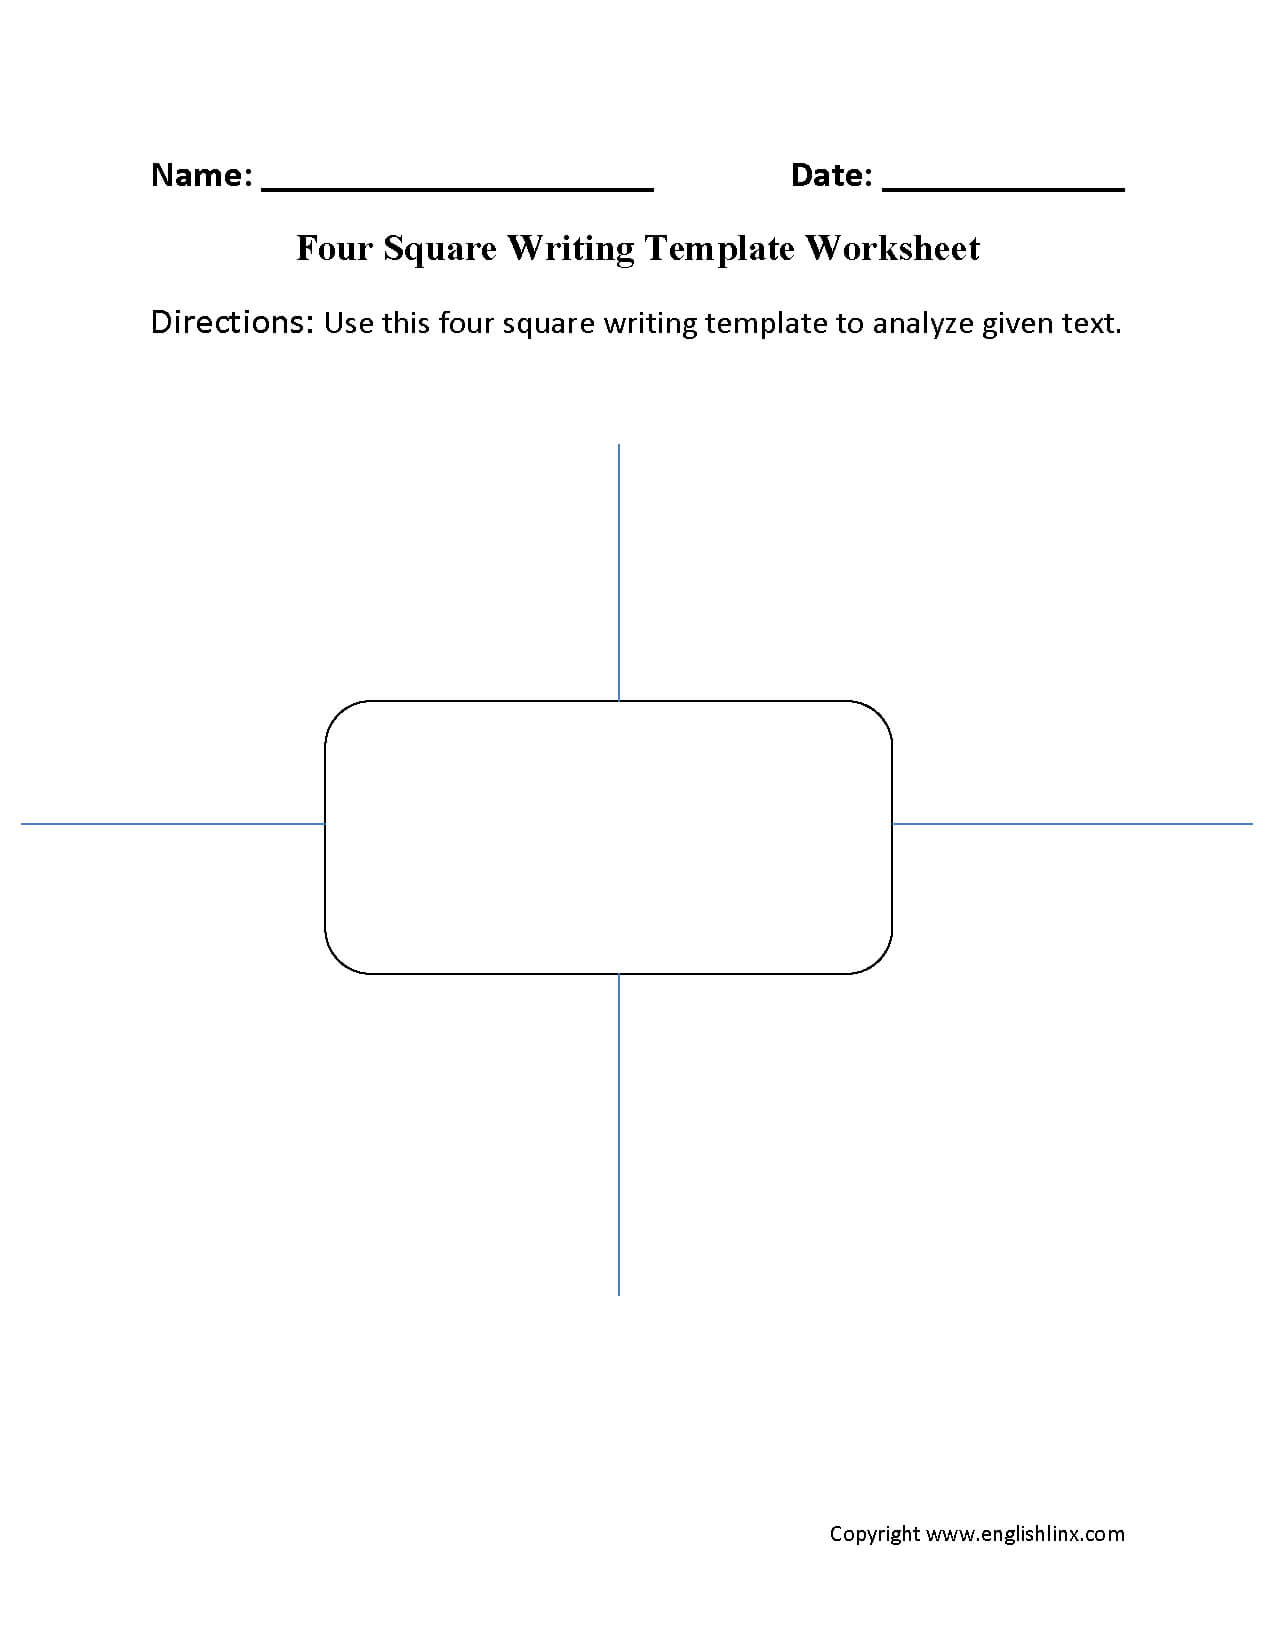 Writing Worksheets | Writing Template Worksheets Intended For Blank Four Square Writing Template